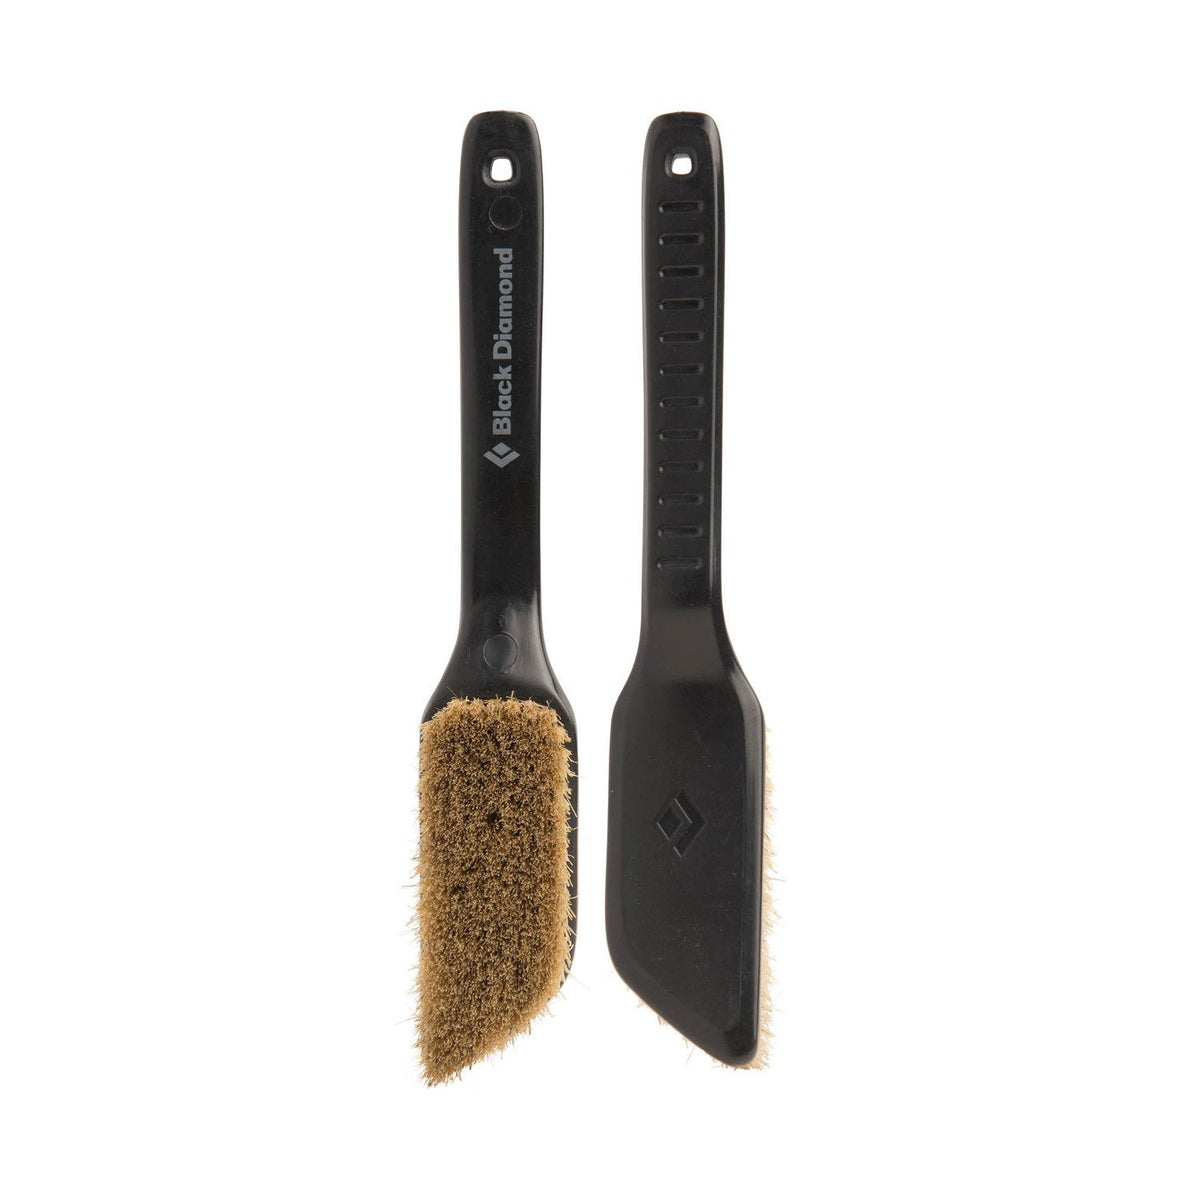 Pair of black Black Diamond Boars Hair Brushes - Medium, 1 shown facing and 1 shown in the reverse